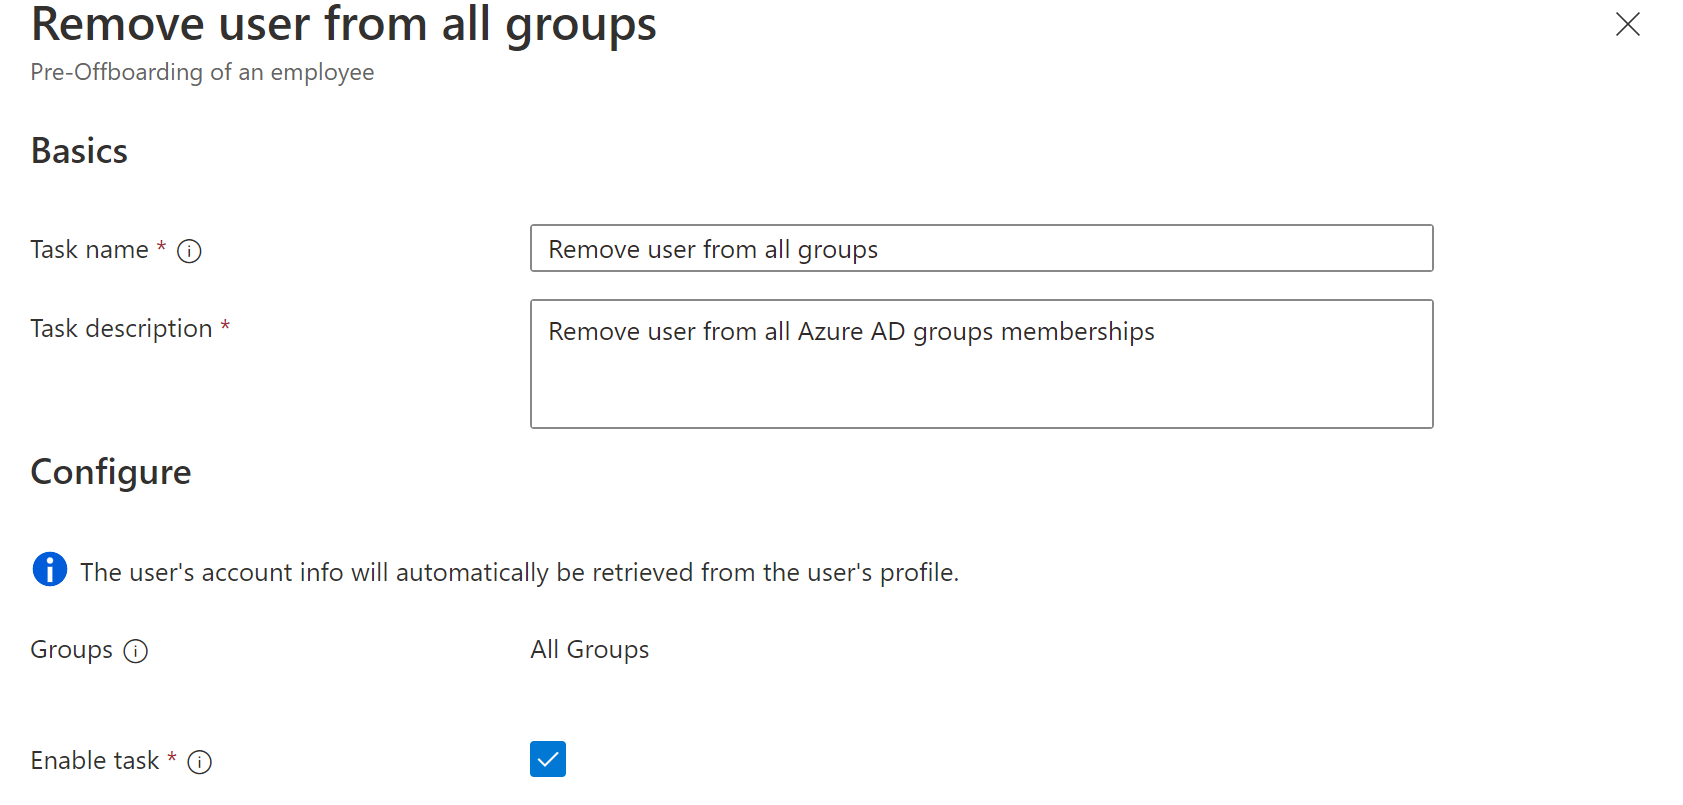 Screenshot of Workflows task: remove user from all groups.